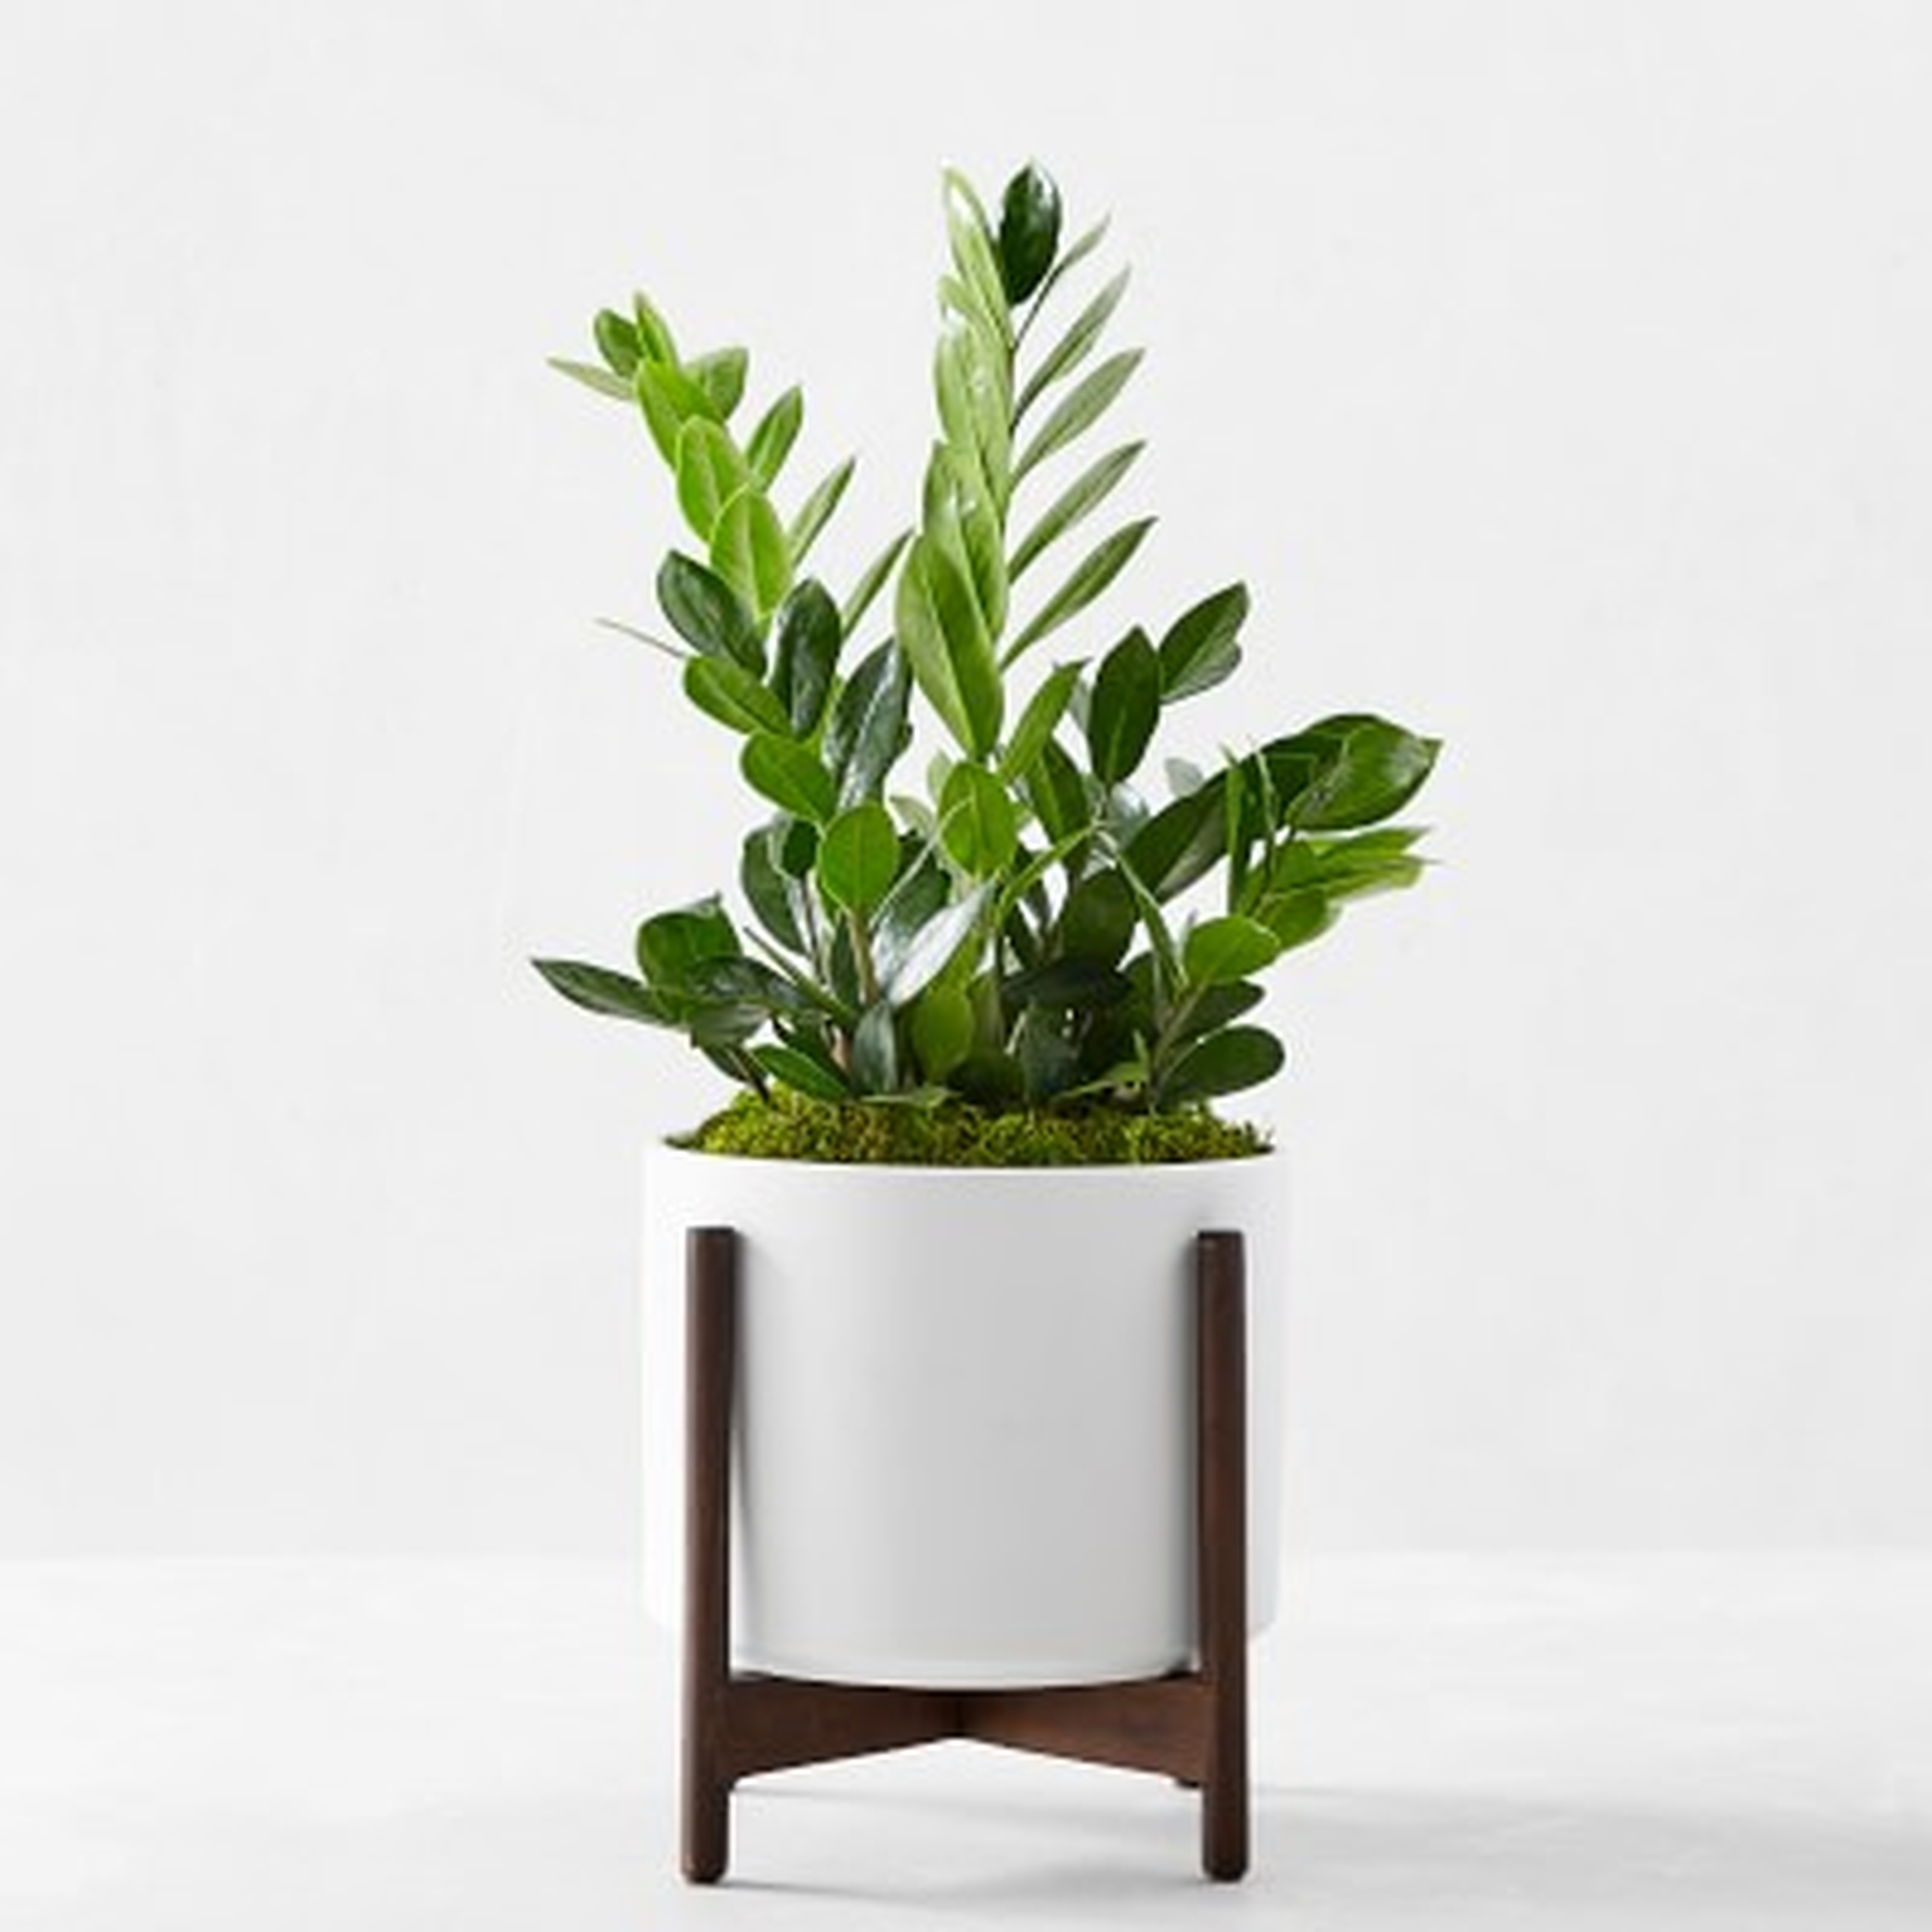 Live Medium Parlor Palm Indoor House Plant in White Pot - Williams Sonoma